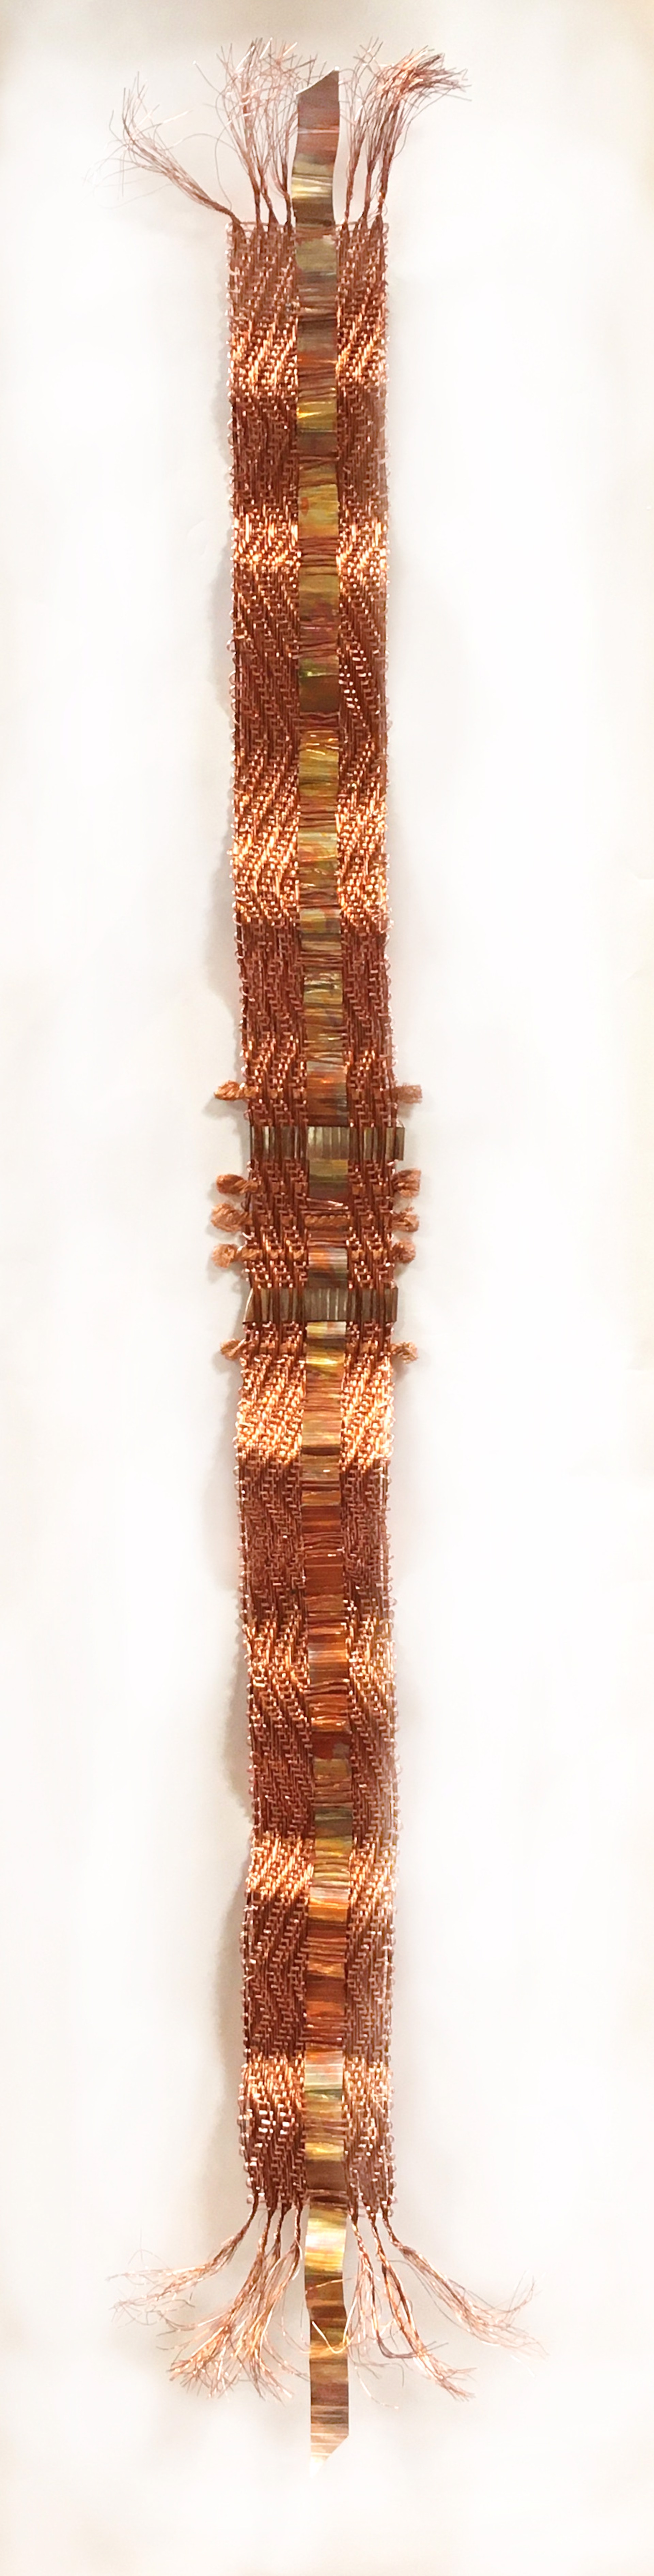 Shangrila Copper/Copper by Susan McGehee